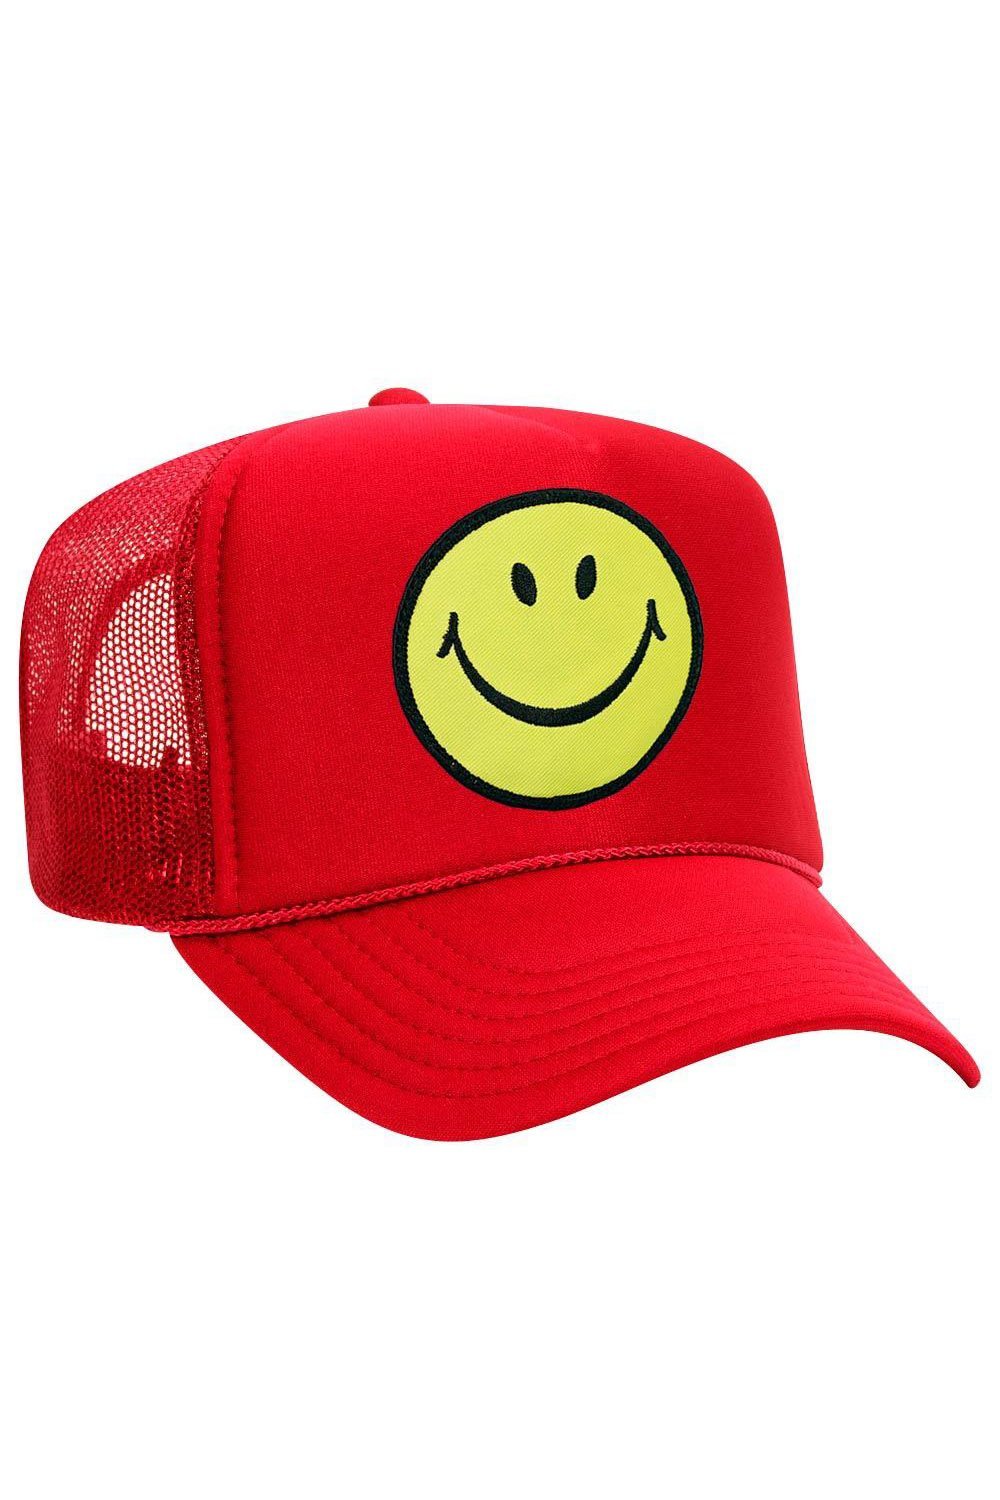 SMILEY VINTAGE TRUCKER HAT HATS Aviator Nation OS RED 